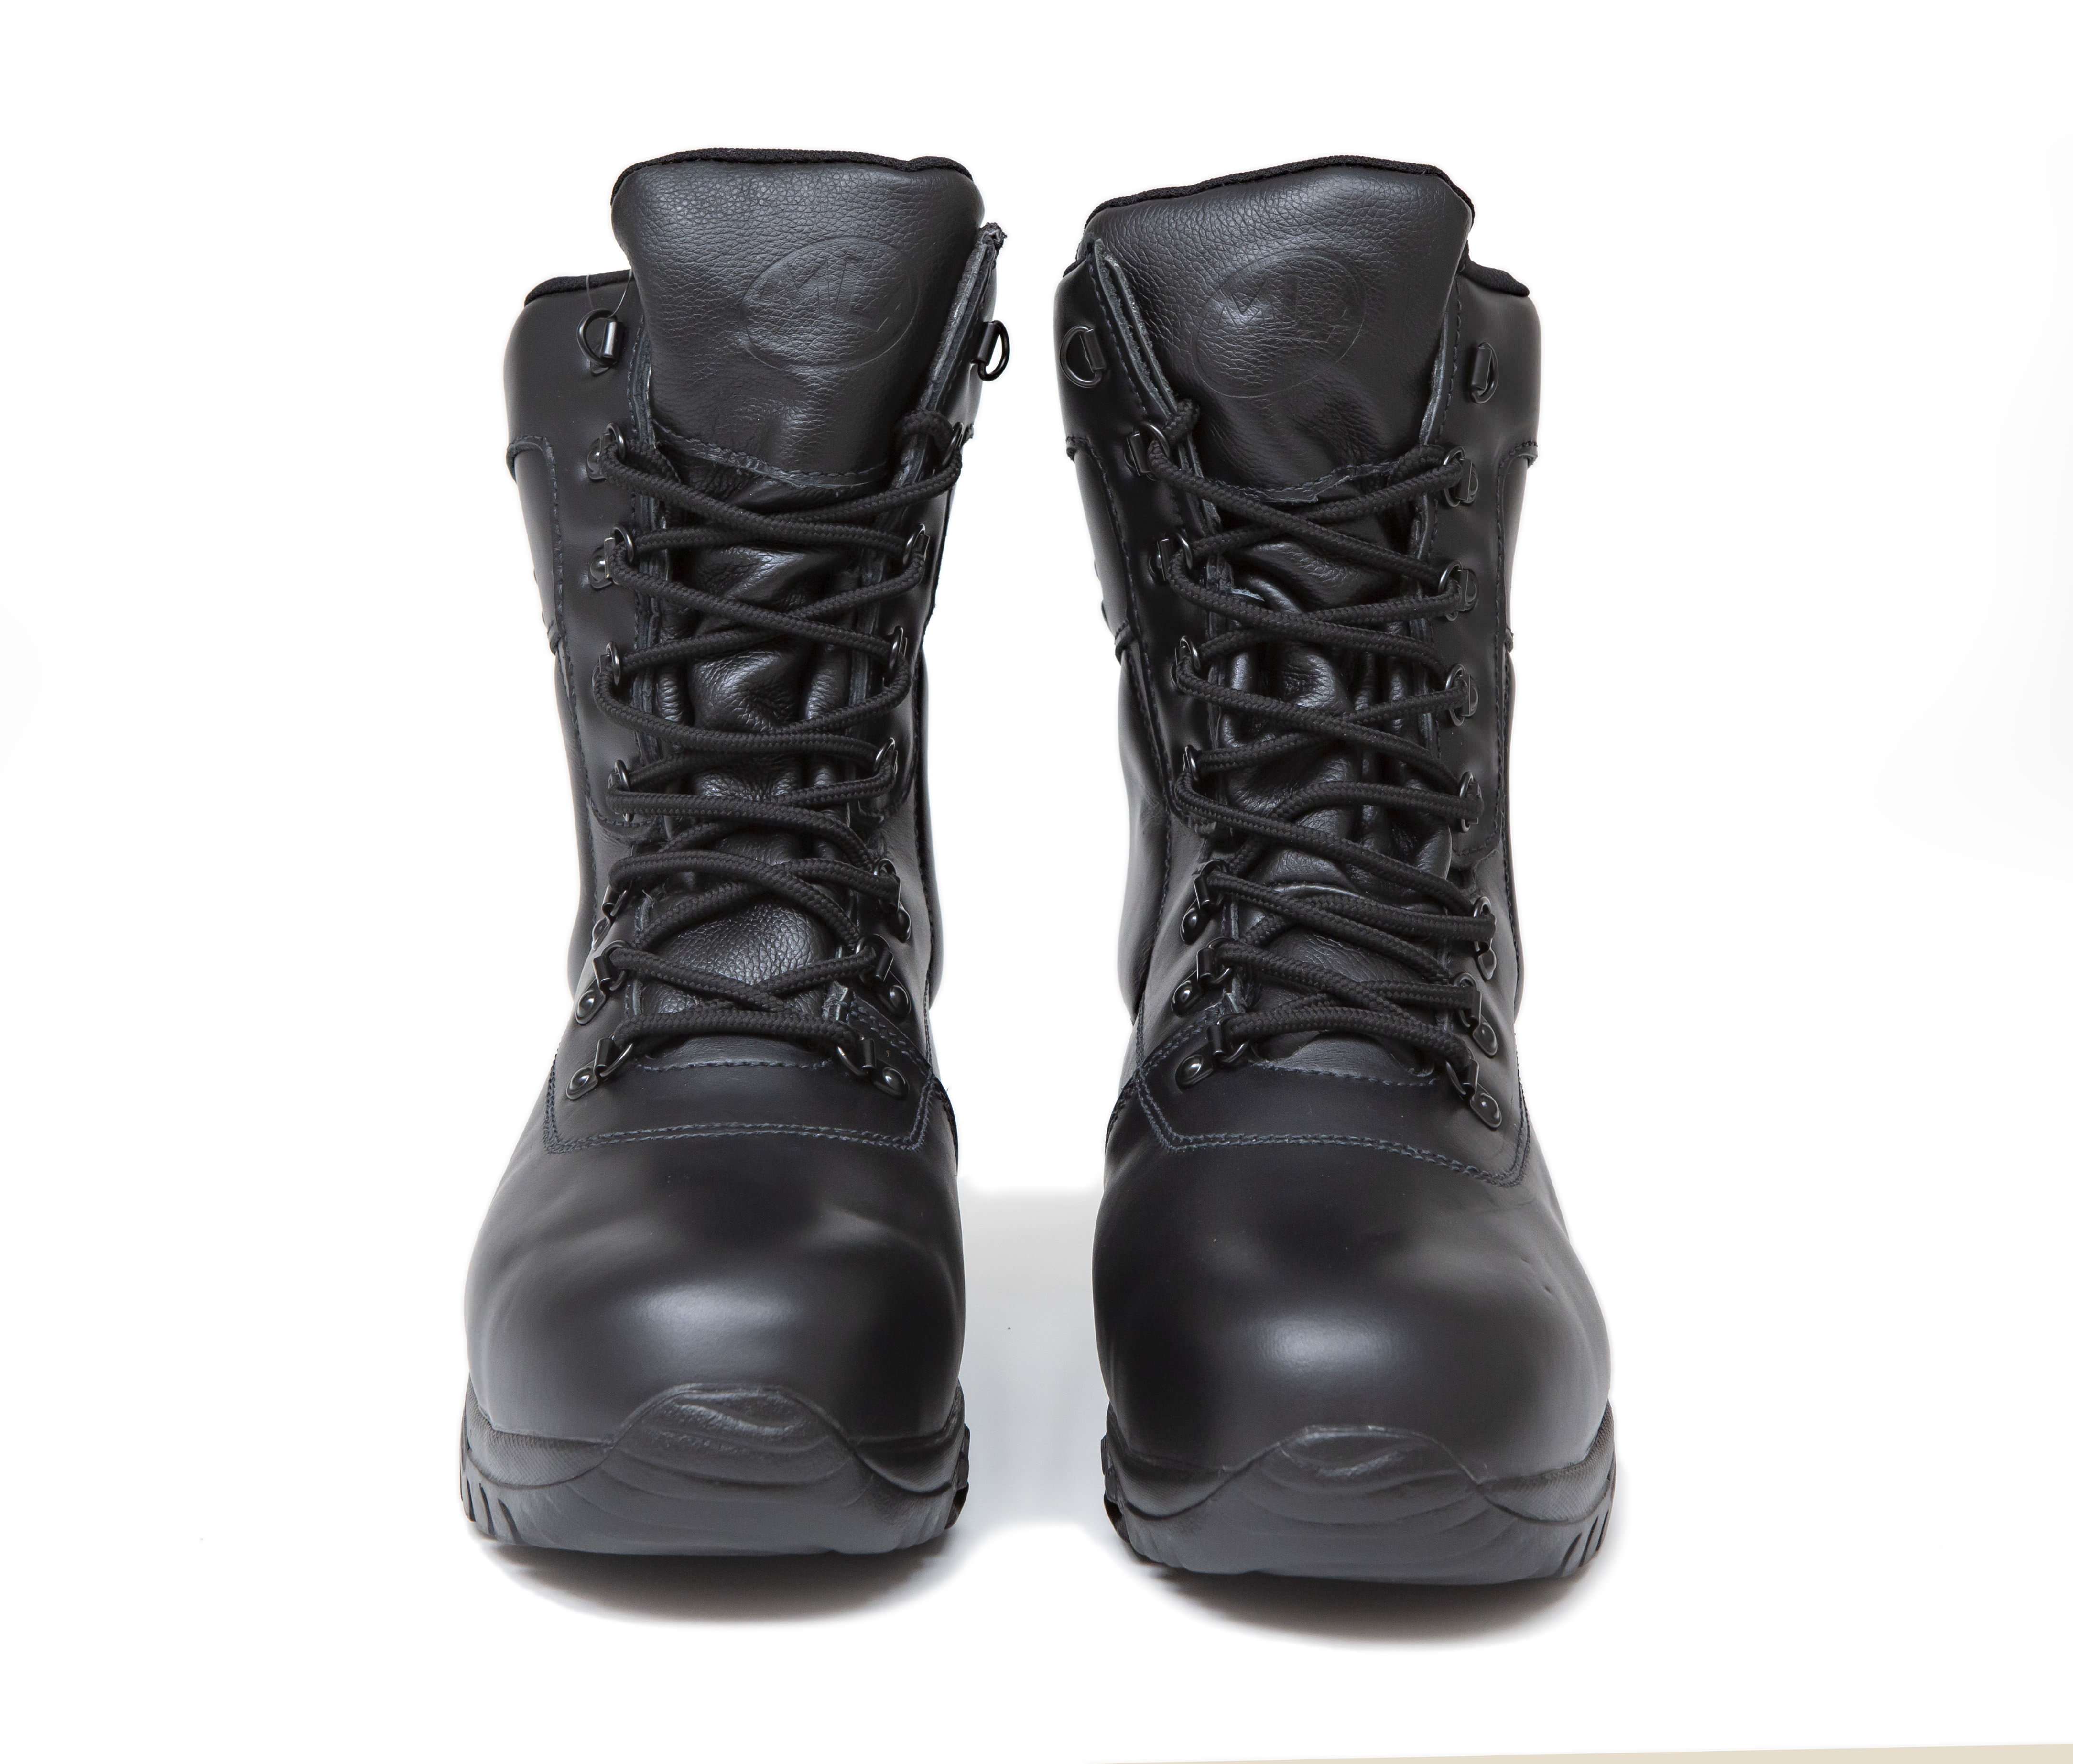 Police Boots with Integral Metatarsal Protector - Guaranteed Protection